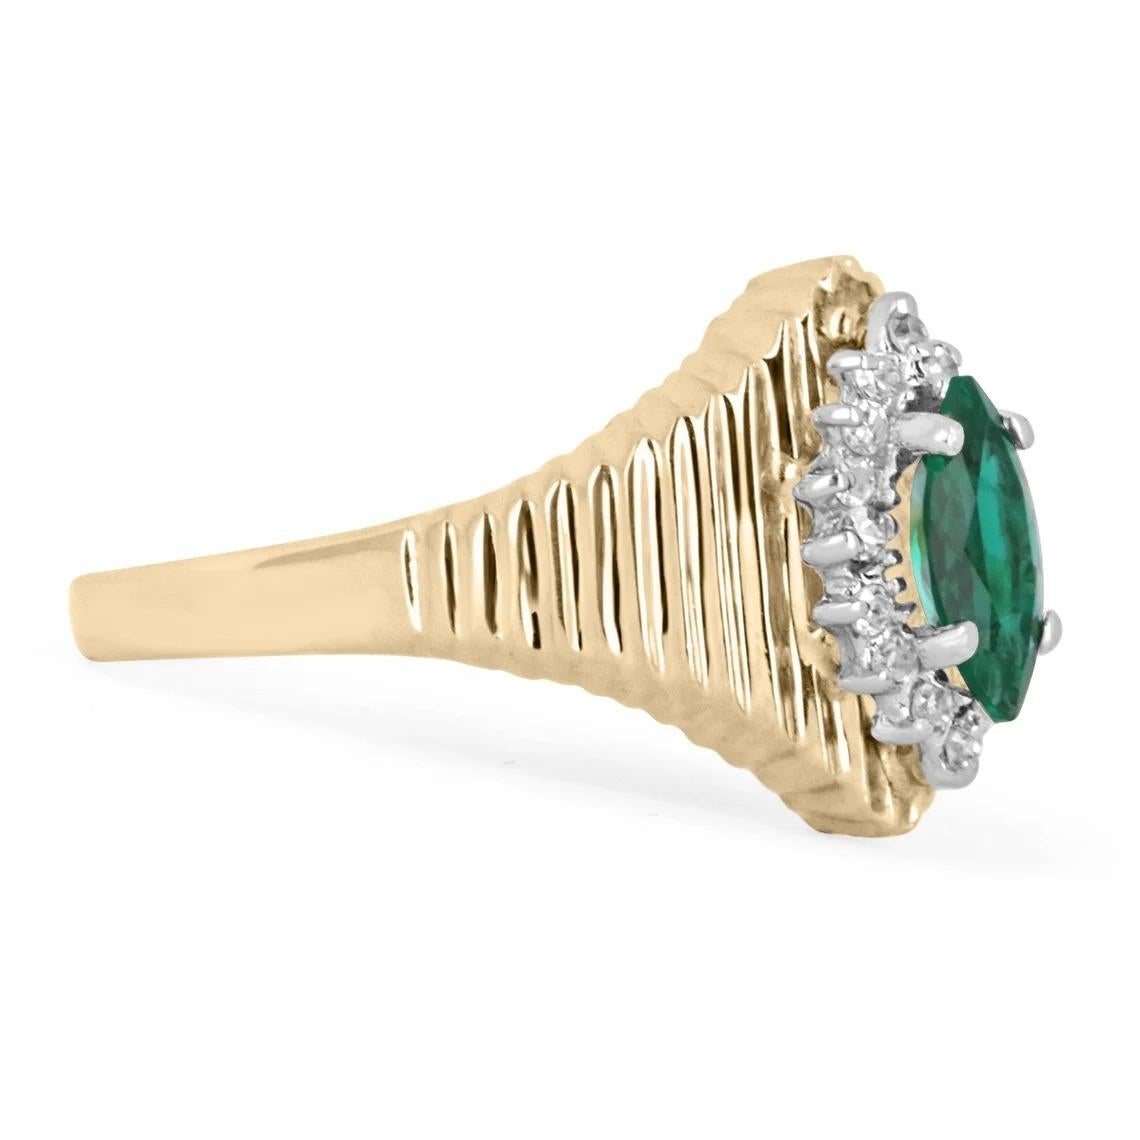 An absolutely stunning emerald and diamond statement ring. The center stone is a synthetic, marquise-cut emerald, displaying a vivid dark green color, with perfect charactertistics. The center stone is surrounded by 16 petite, brilliant round cut